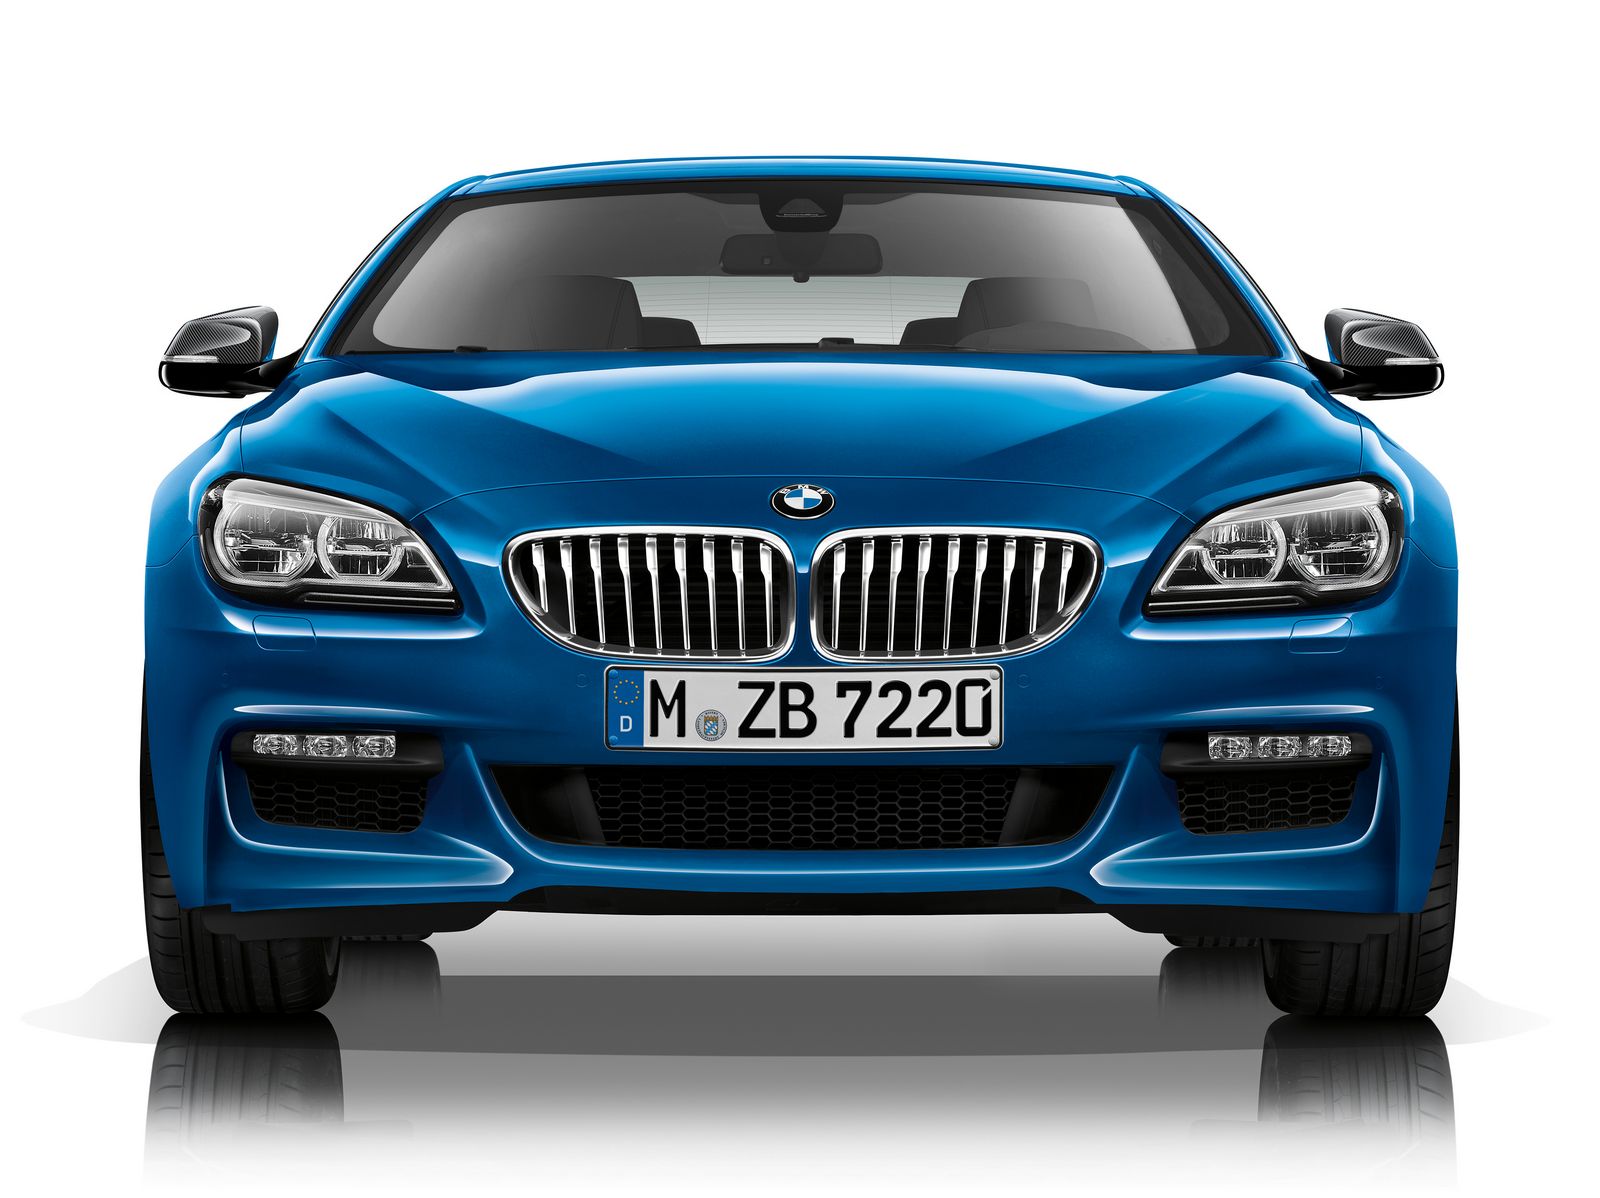 This Is the Magnificent BMW 6-Series with M Sport Limited Edition